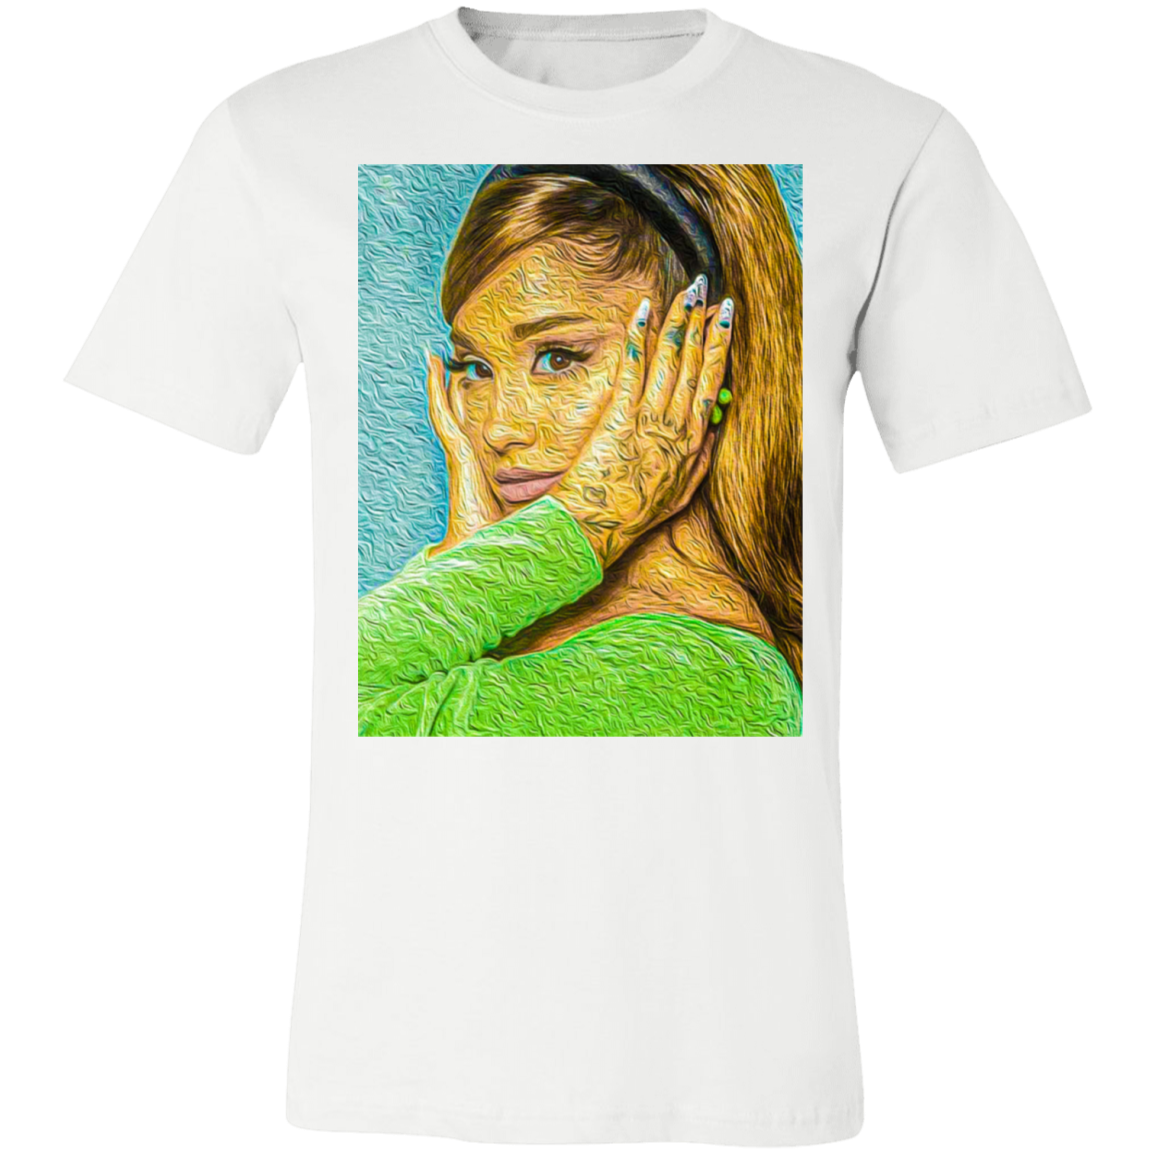 ariana grande graphic tee in white, design has blue background and she's wearing a green top